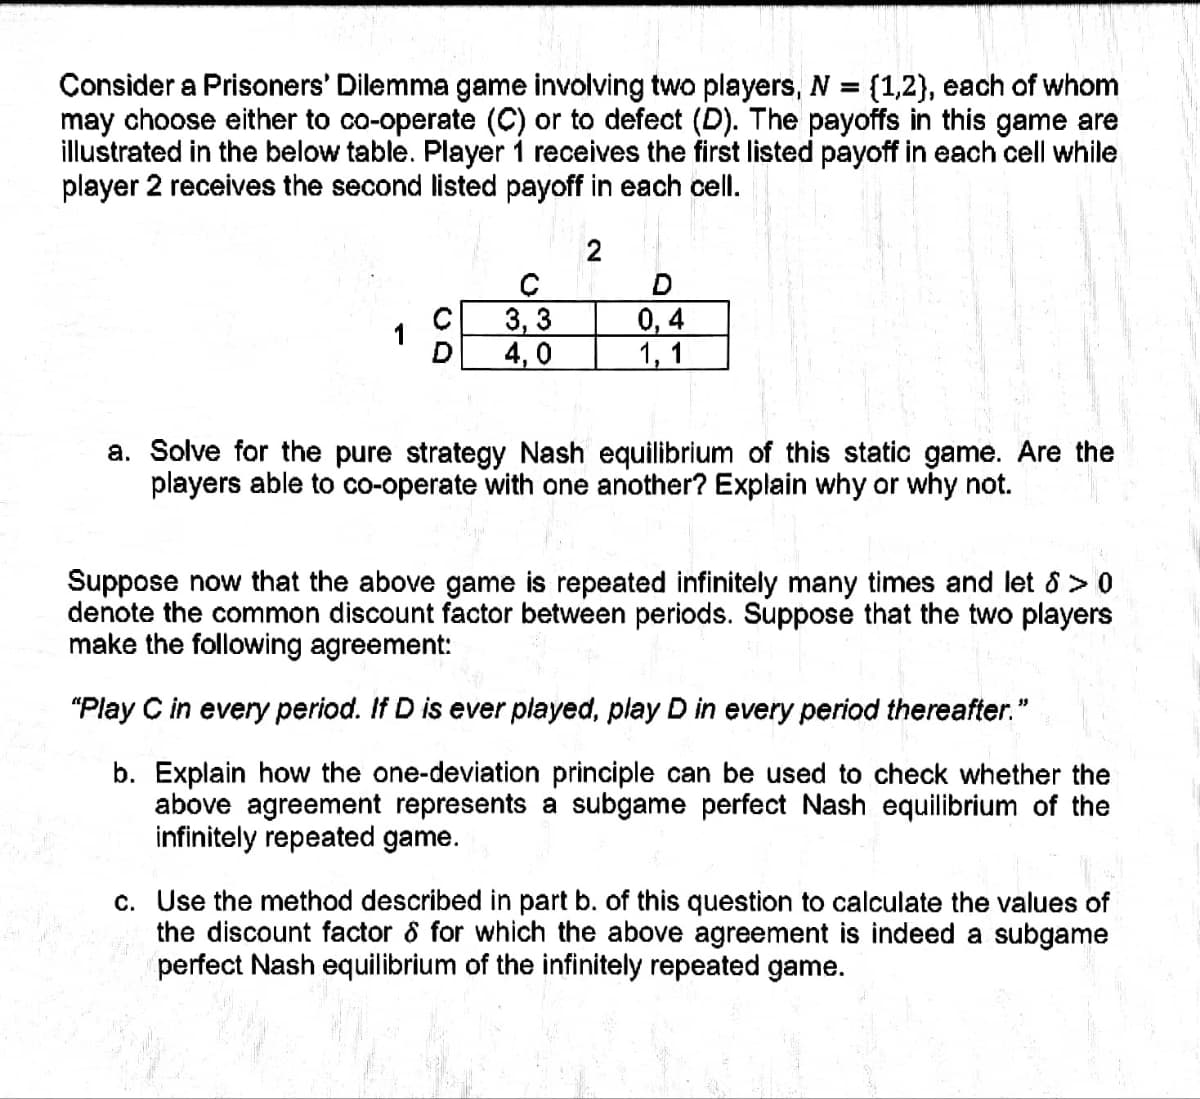 Consider a Prisoners' Dilemma game involving two players, N = {1,2}, each of whom
may choose either to co-operate (C) or to defect (D). The payoffs this game are
illustrated in the below table. Player 1 receives the first listed payoff in each cell while
player 2 receives the second listed payoff in each cell.
2
с
3,3
4,0
D
0,4
1, 1
a. Solve for the pure strategy Nash equilibrium of this static game. Are the
players able to co-operate with one another? Explain why or why not.
Suppose now that the above game is repeated infinitely many times and let 8 > 0
denote the common discount factor between periods. Suppose that the two players
make the following agreement:
"Play C in every period. If D is ever played, play D in every period thereafter."
b. Explain how the one-deviation principle can be used to check whether the
above agreement represents a subgame perfect Nash equilibrium of the
infinitely repeated game.
c. Use the method described in part b. of this question to calculate the values of
the discount factor & for which the above agreement is indeed a subgame
perfect Nash equilibrium of the infinitely repeated game.